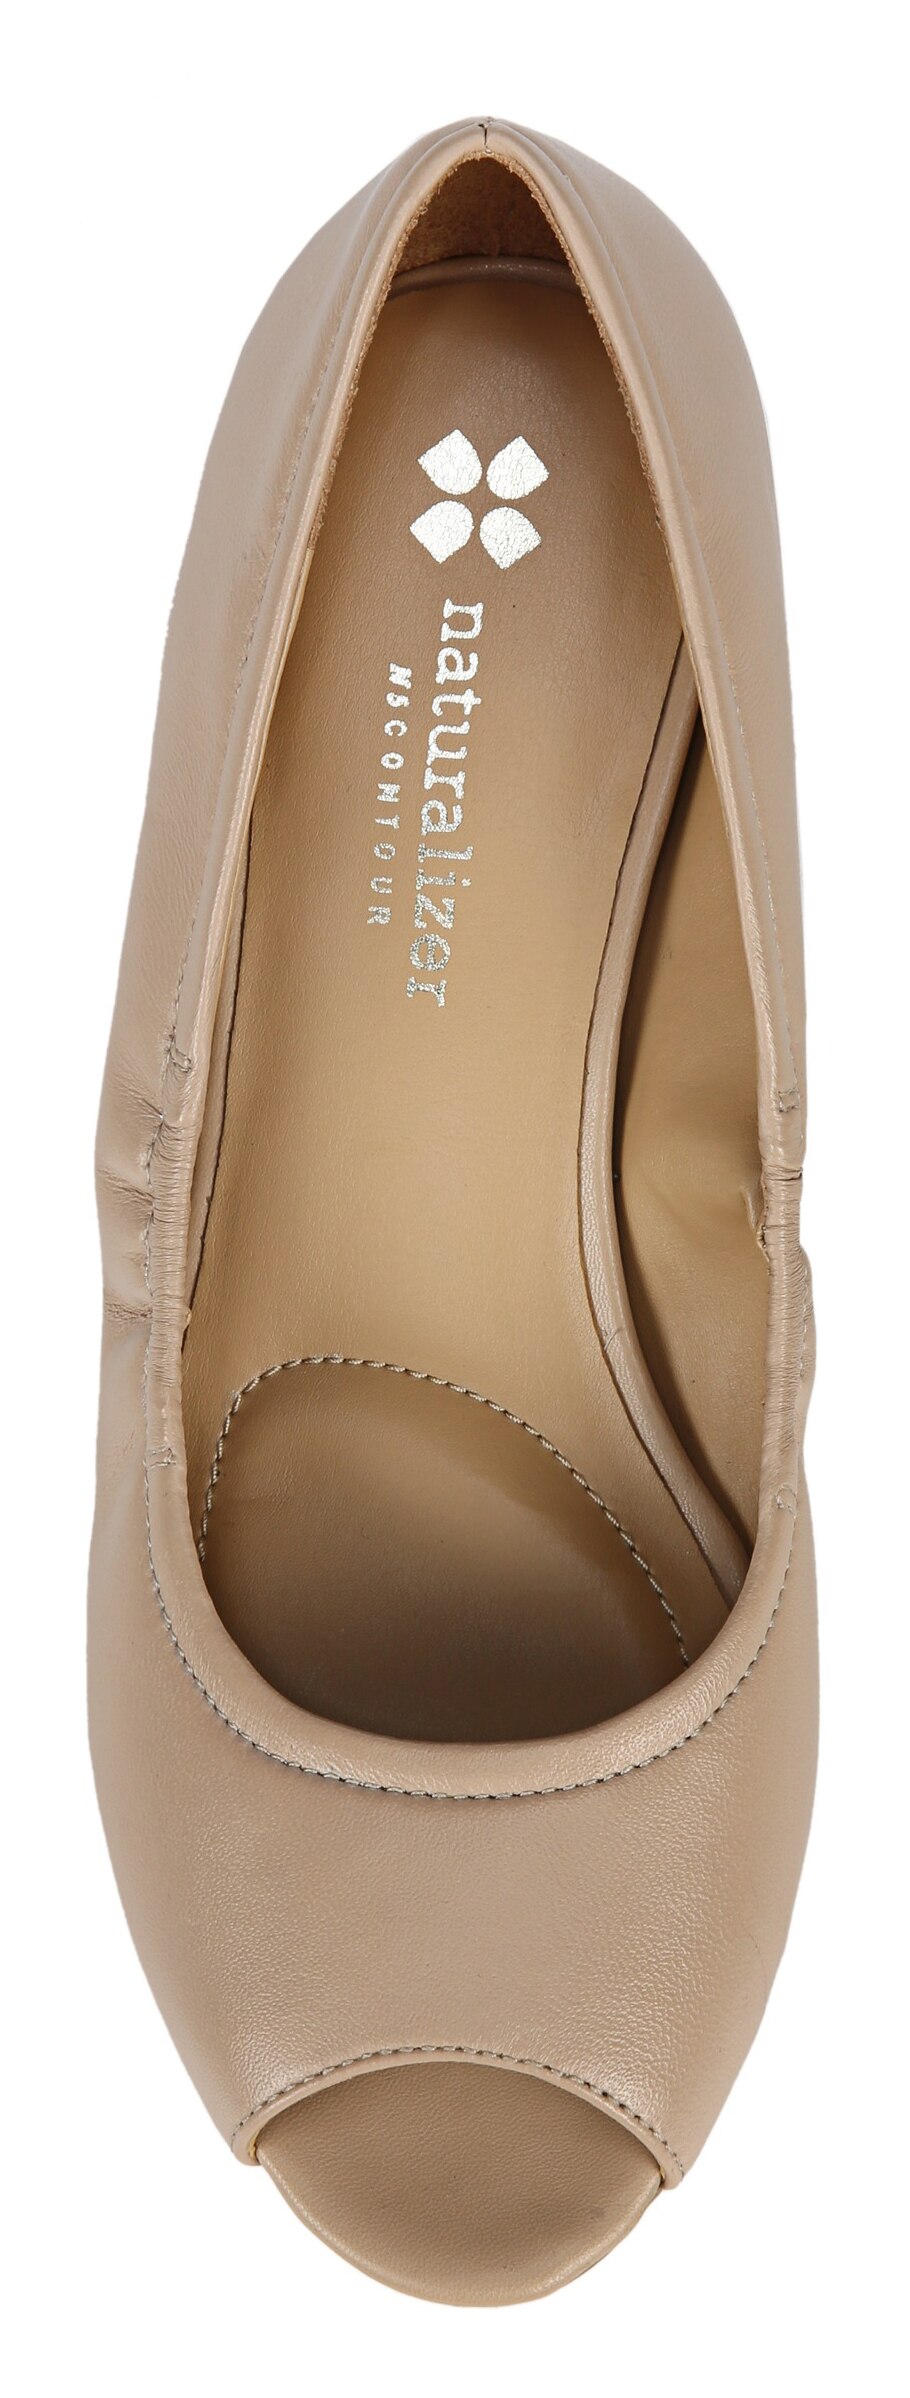 naturalizer contrast wedge